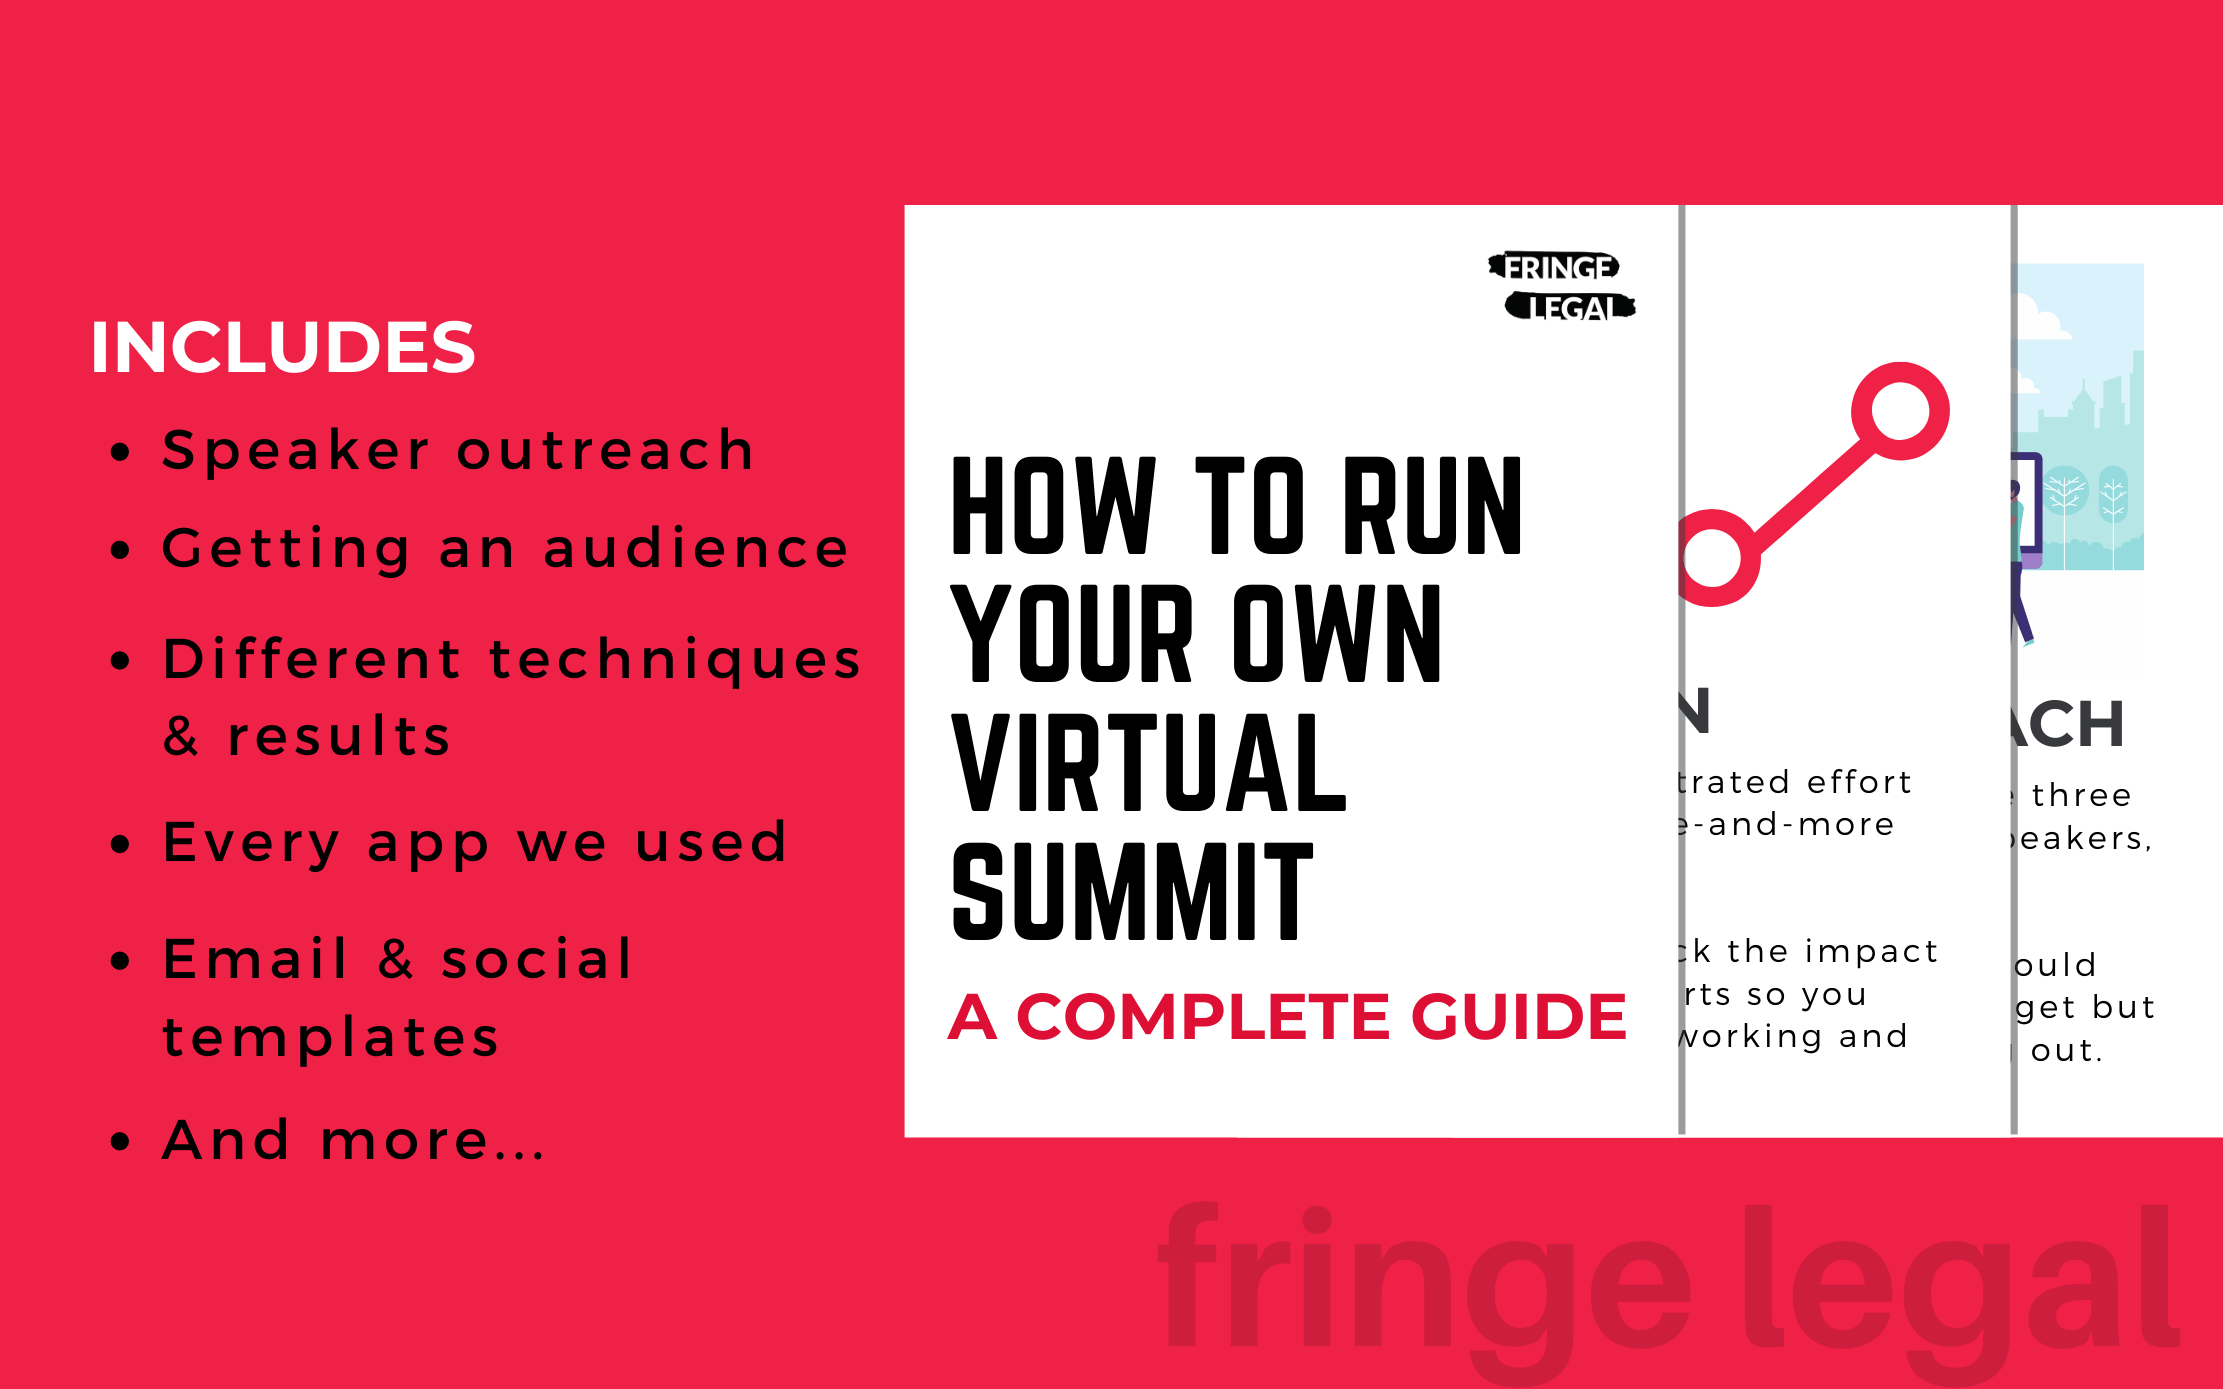 How to run your own summit – a complete guide